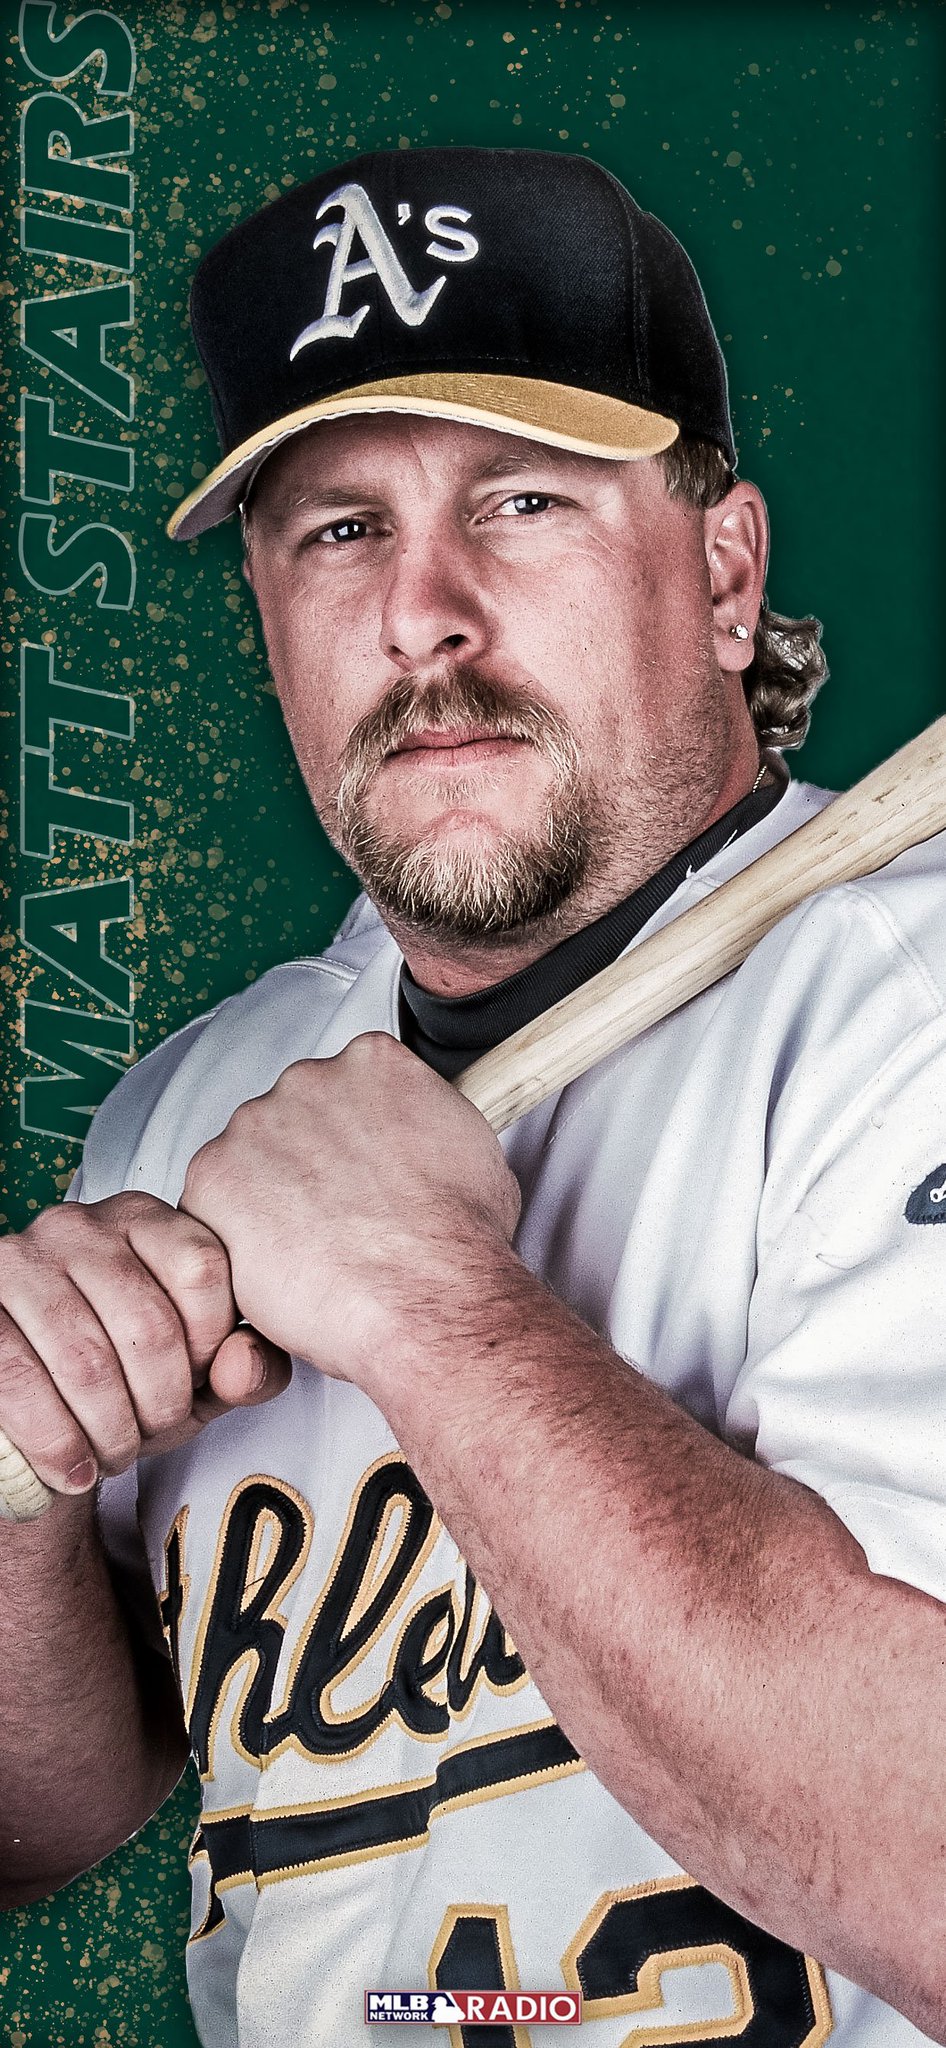 The only you need.    Happy 51st birthday today to THE Matt Stairs    